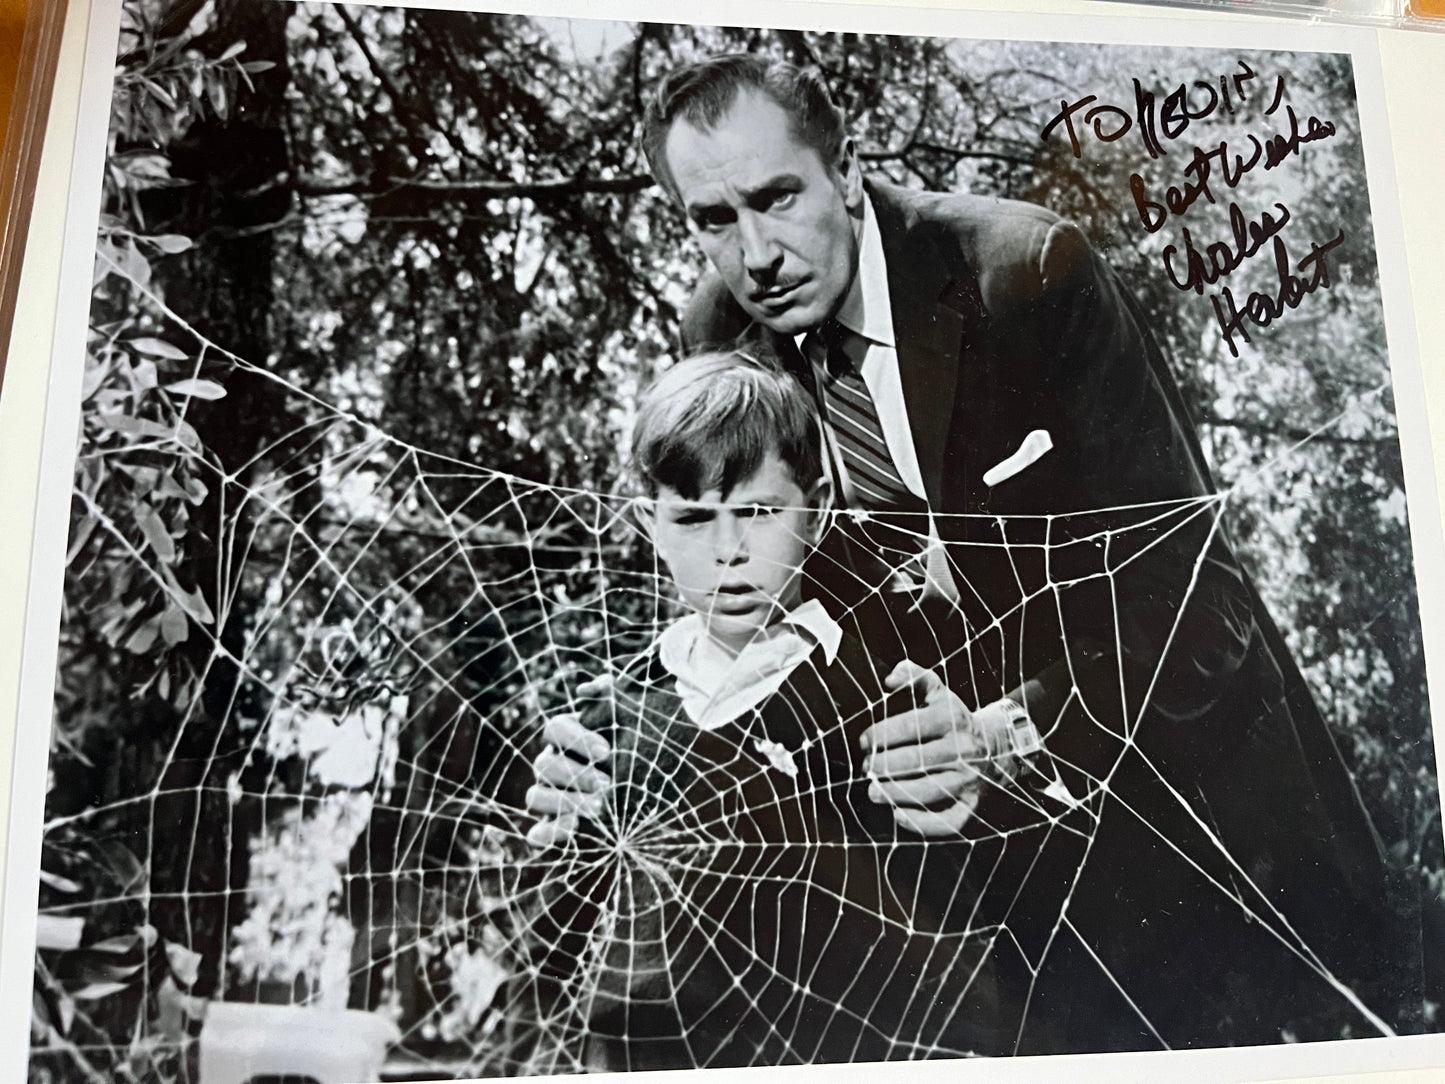 CHARLES HERBERT, The Fly (1958 version), autograph